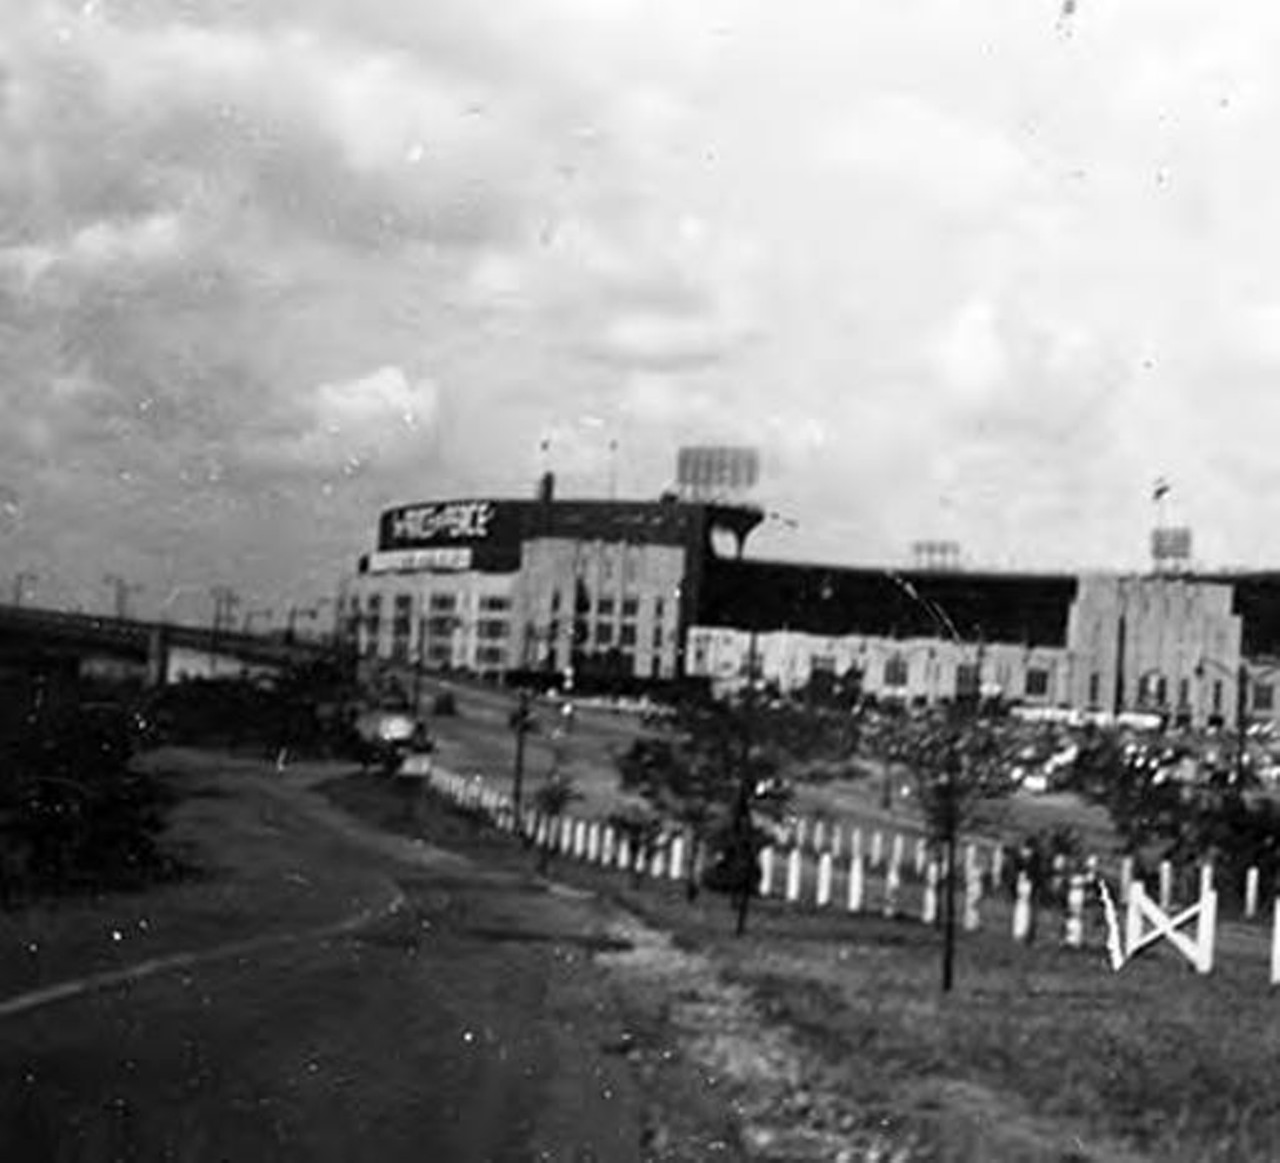 Cleveland Municipal Stadium. In addition to hosting Cleveland Indians home games and other events, it was also home to various events of the Great Lakes Exposition in the summers of 1936 and 1937.